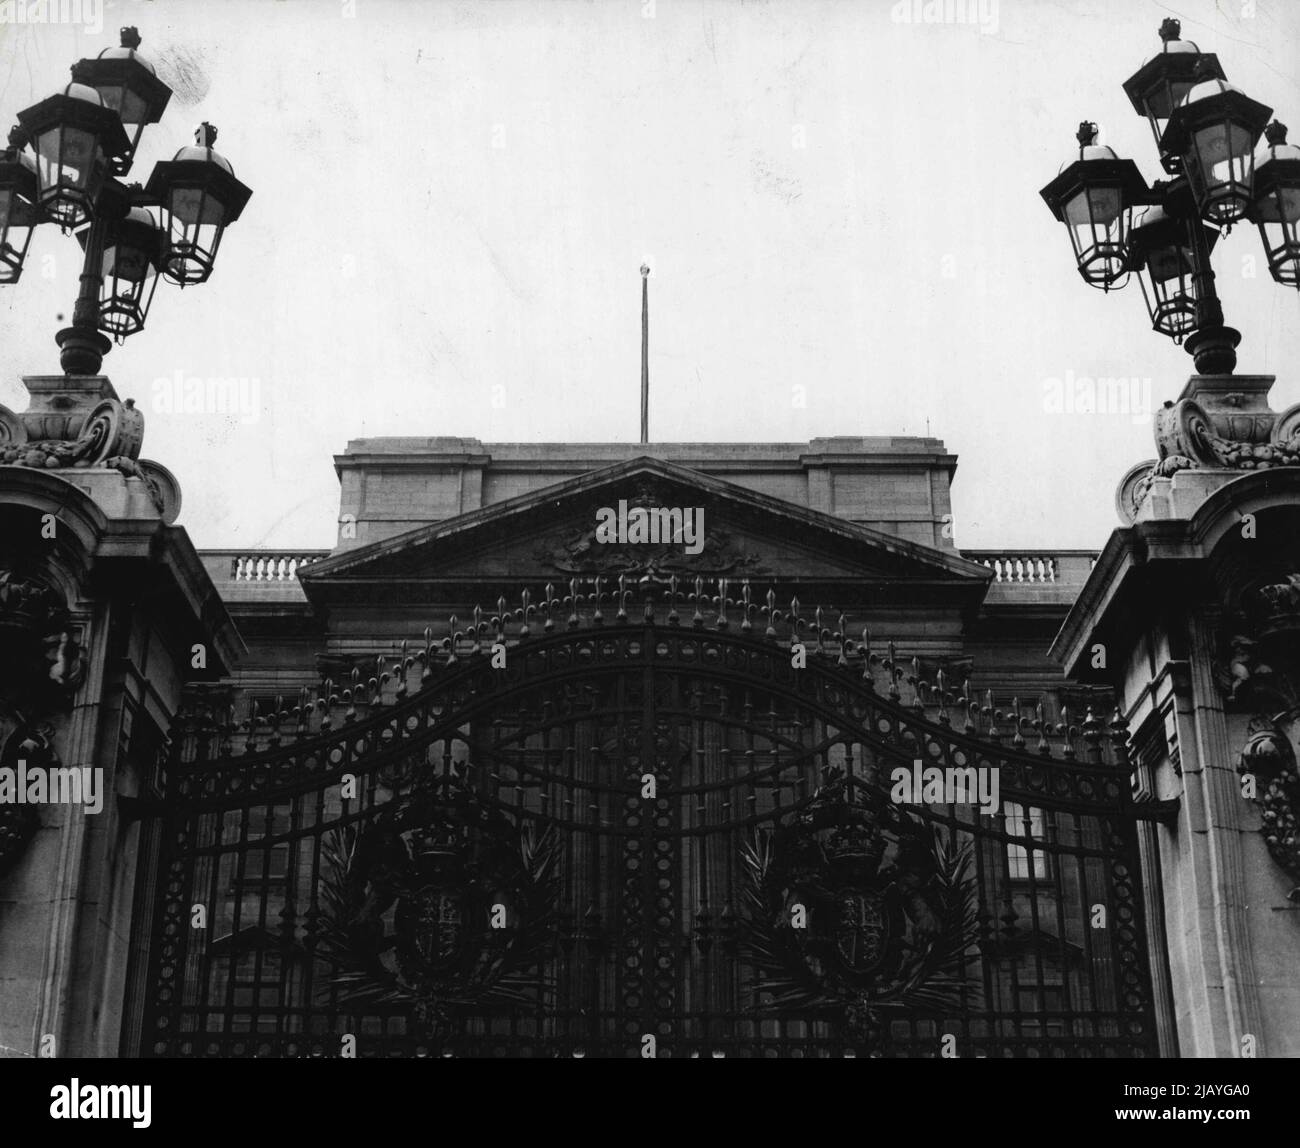 Round And About Buckingham Palace - The central or main gates to Buckingham Palace. Adorned with the Royal crest, the gates are flanked by pillars which are topped with 'bunch-Of-grapes' clusters of lanterns. Seen above the gates, at the triangular upper finish of the Palace centre, the Royal coat-of-arms is seen again. January 11, 1949. (Photo by Camera Press). Stock Photo